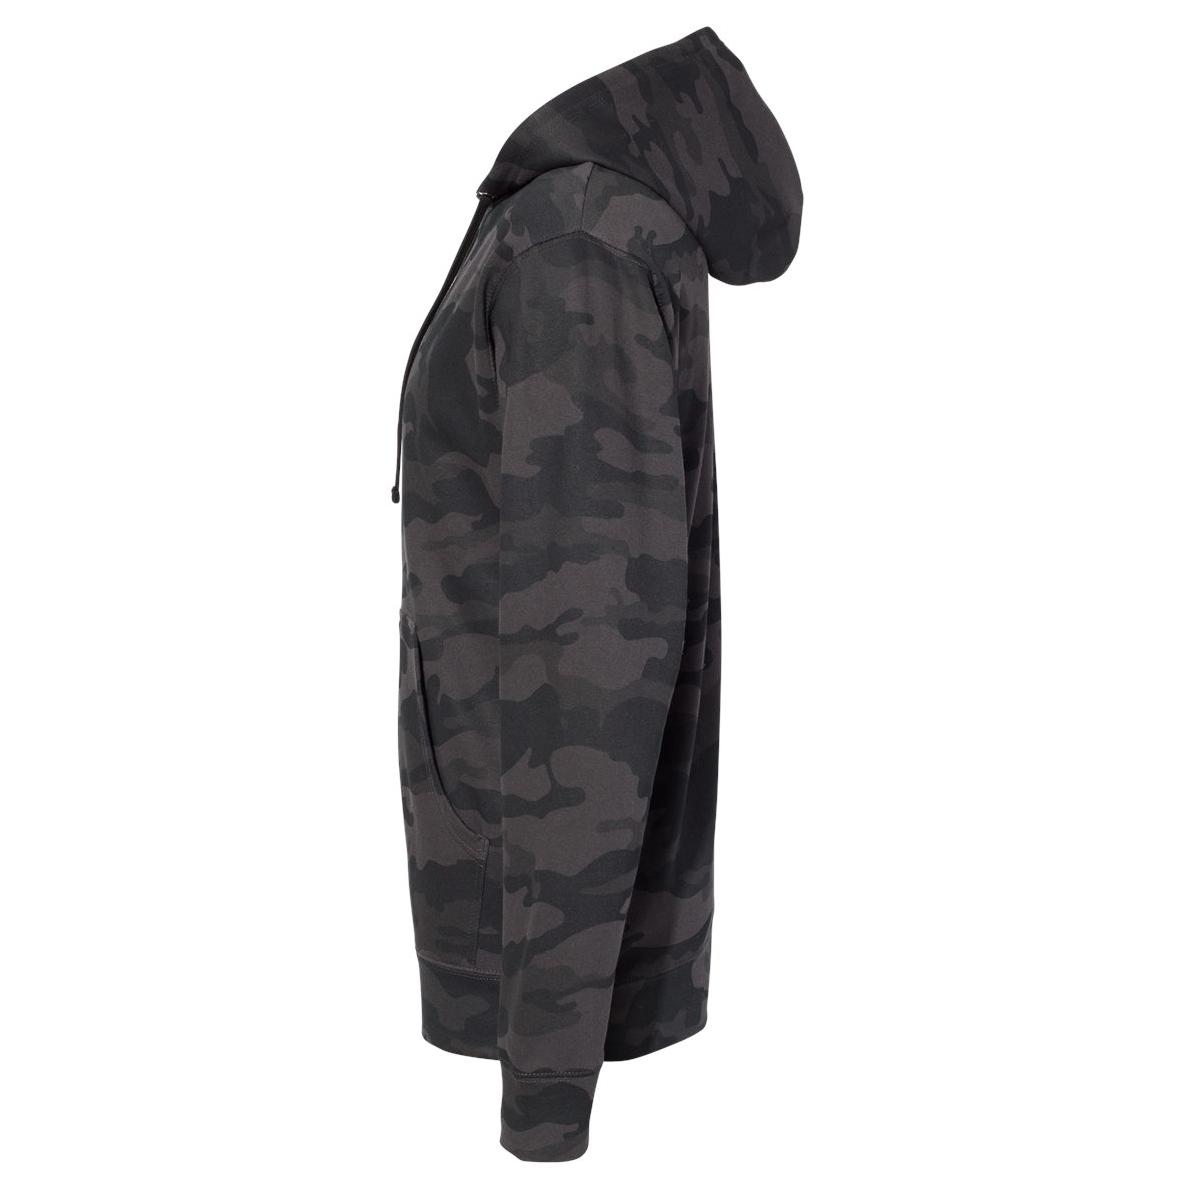 Independent Trading Co. SS4500 Midweight Hooded Sweatshirt - Black Camo ...